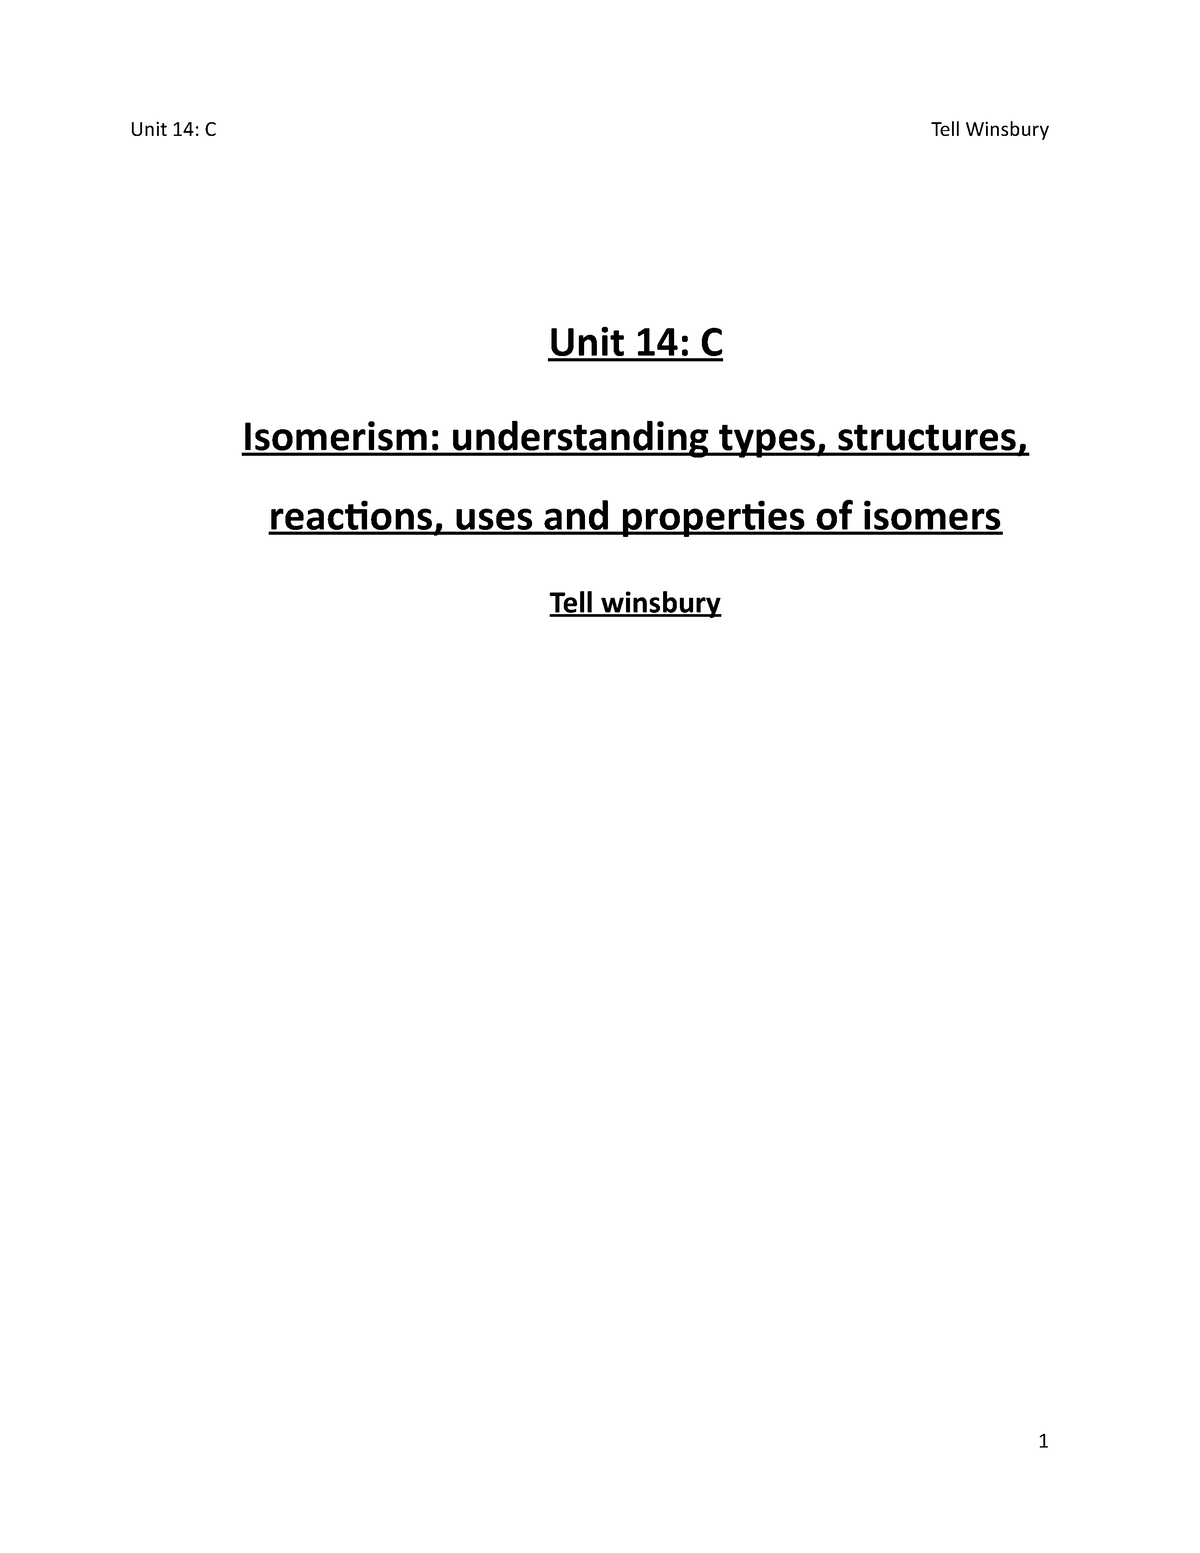 unit 14 assignment c applied science